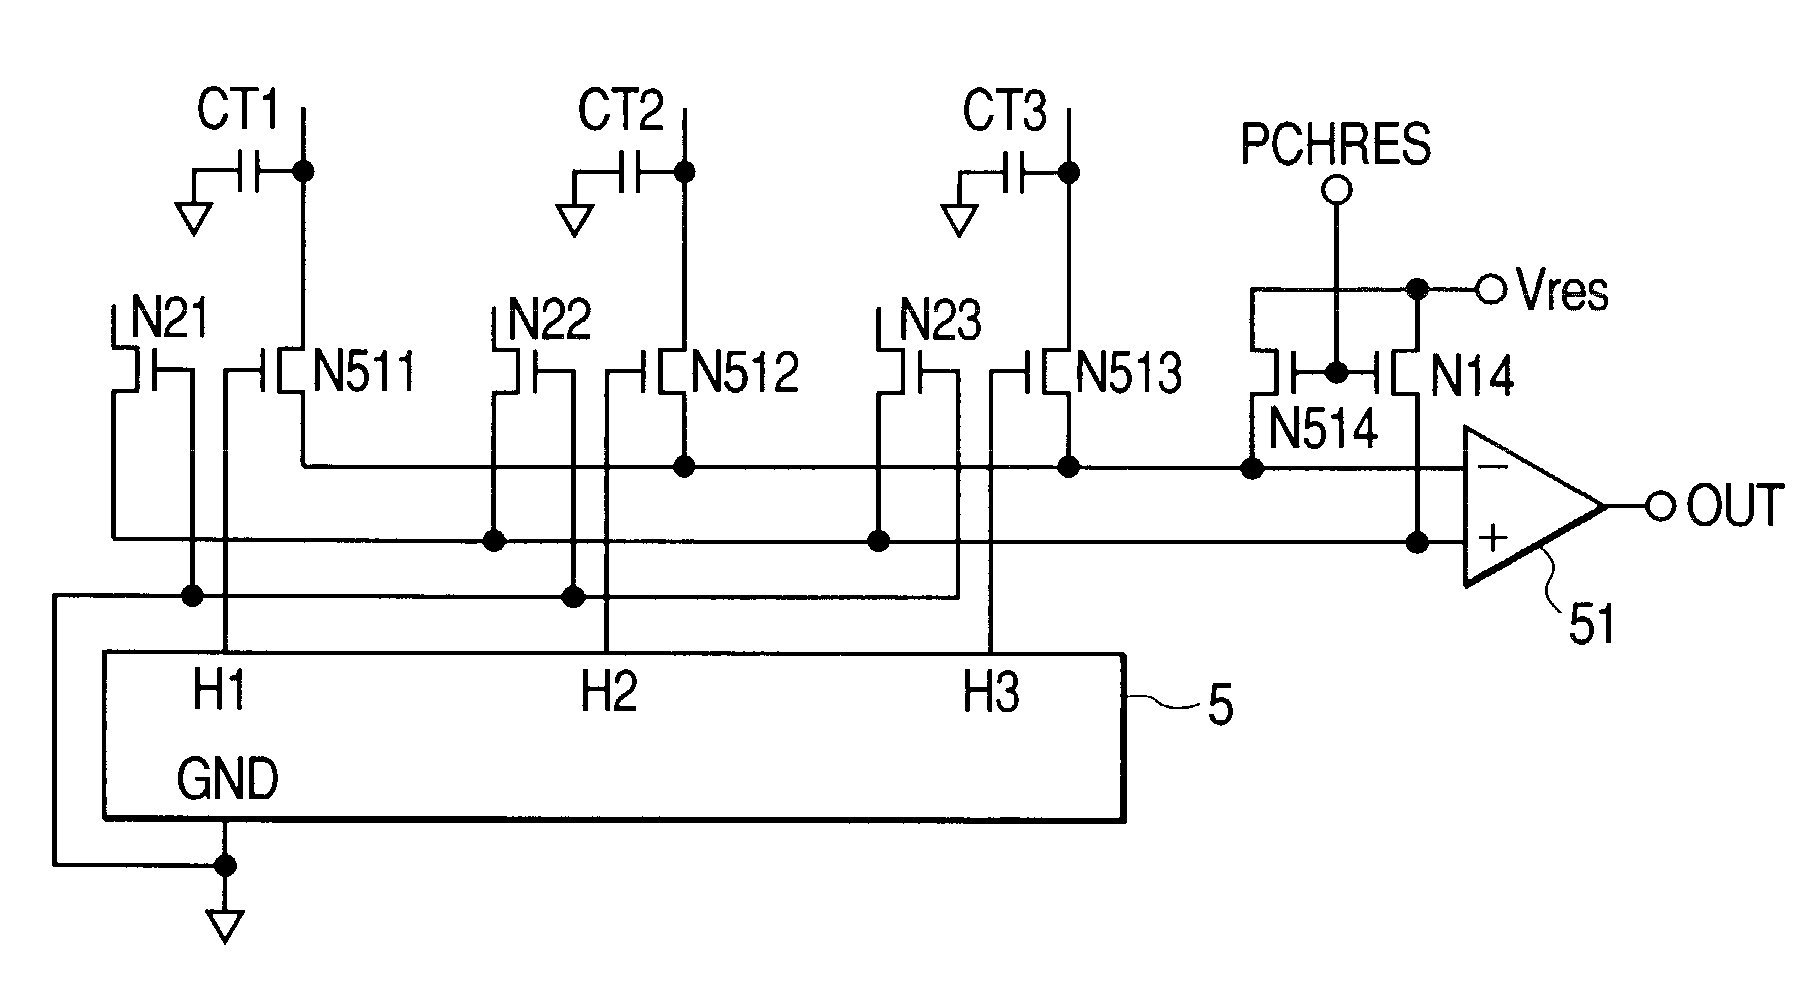 Solid-state image pickup apparatus having a differential output